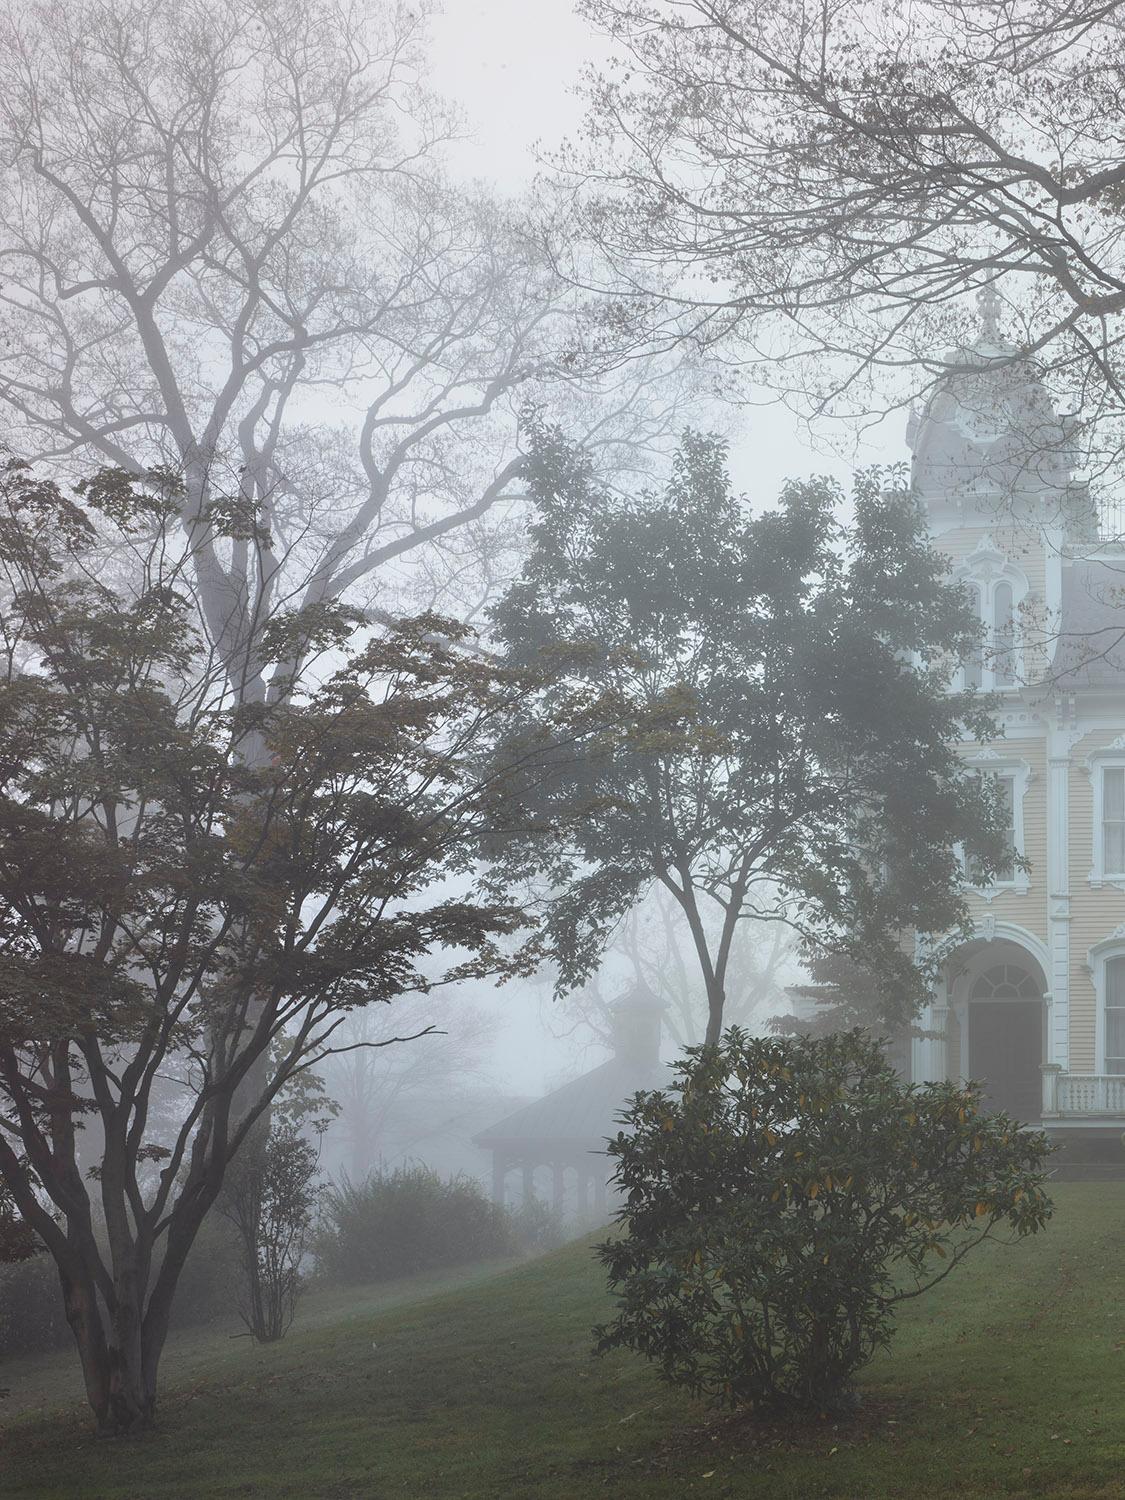 Andrew Moore Color Photograph - Empire in fog_RHBK (50"x40")